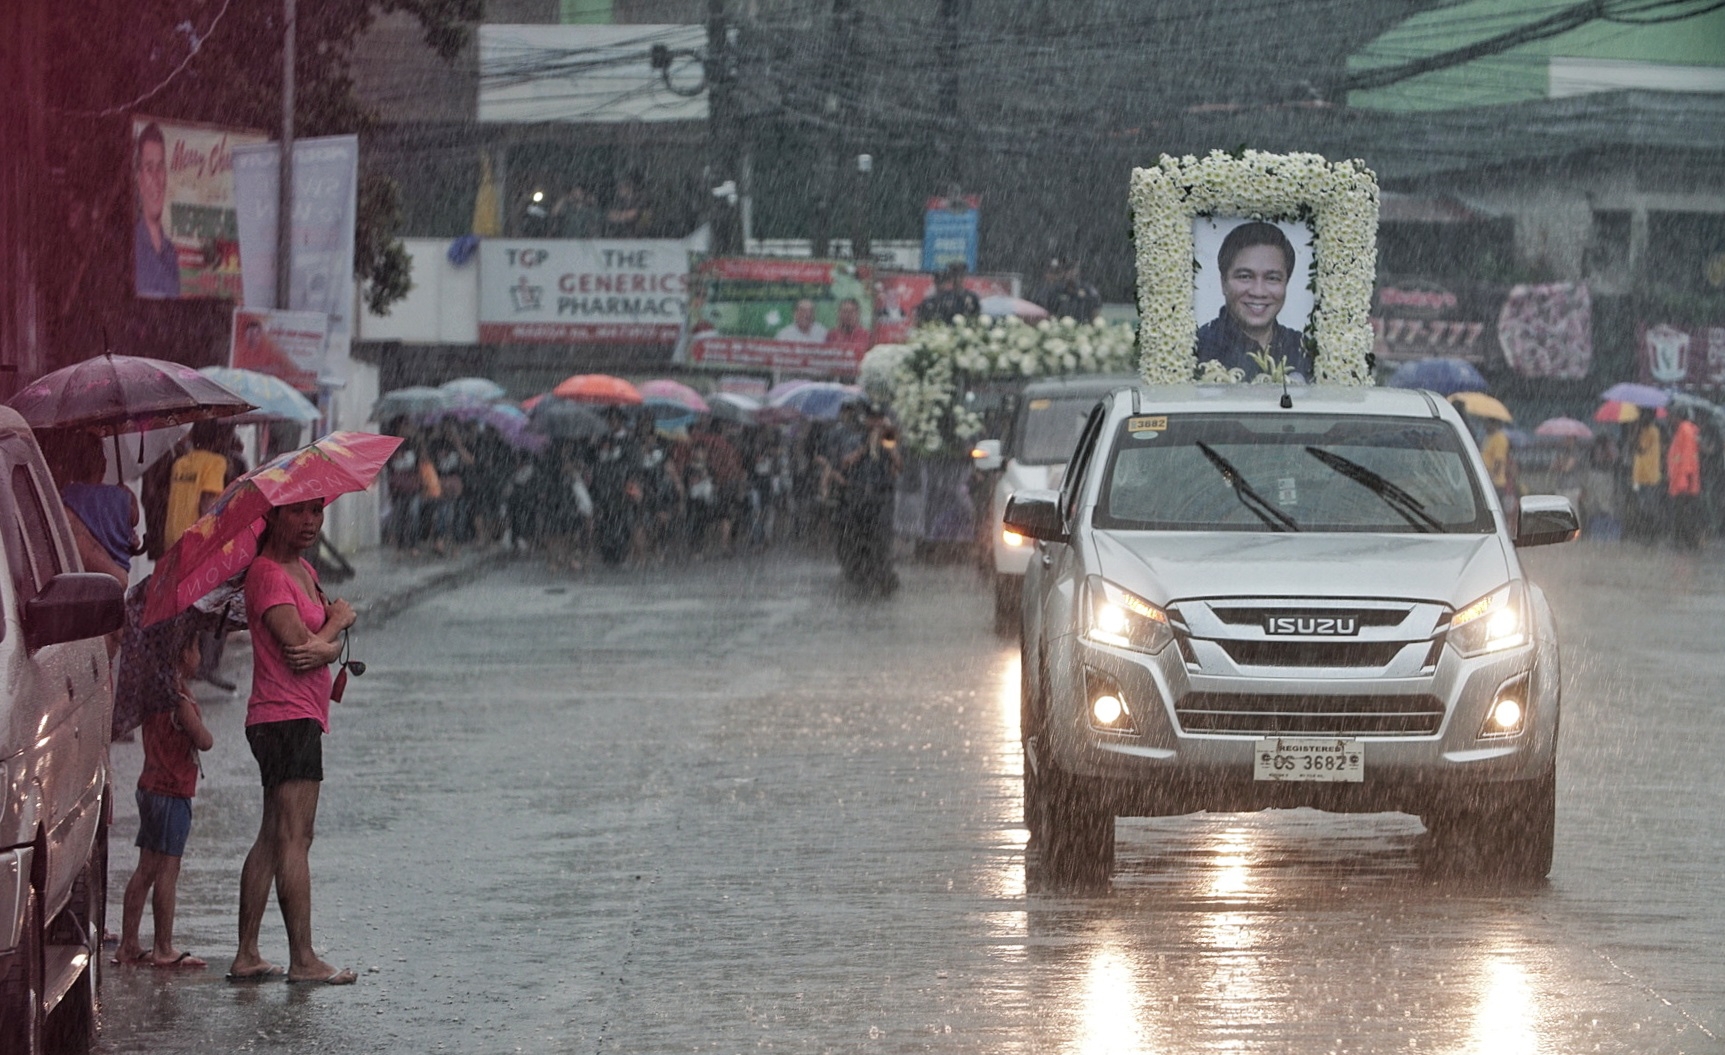 CONG. BATOCABE FUNERAL PROCESSION / DECEMBER 31, 2018 Drenched with heavy rain supporters joined the funeral march to the Daraga Cemetery after Cong. Rhodel Batocabe internment in Our Lady of the gate parish in Daraga town, Albay parish on December 31, 2018, Monday. PHOTO BY MARK ALVIC ESPLANA / INQUIRER SOUTHERN LUZON